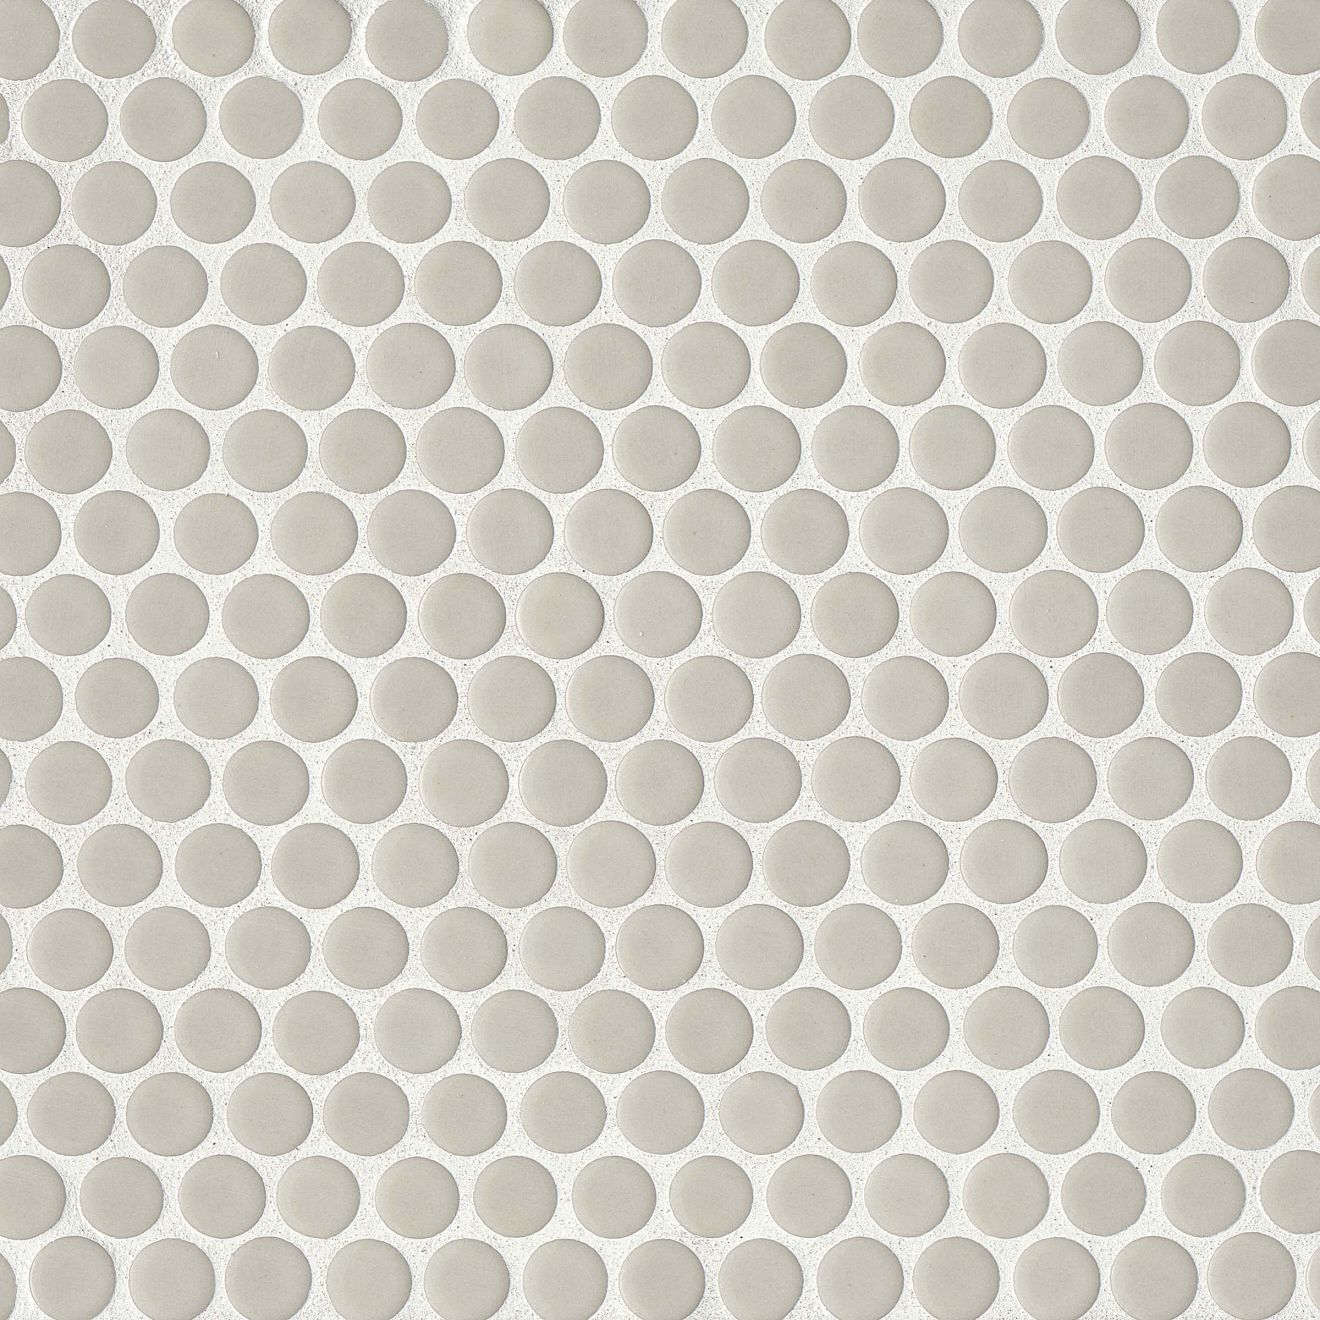 360 3/4" x 3/4" Penny Round Glossy Mosaic Tile in Off White | Bedrosians Tile & Stone